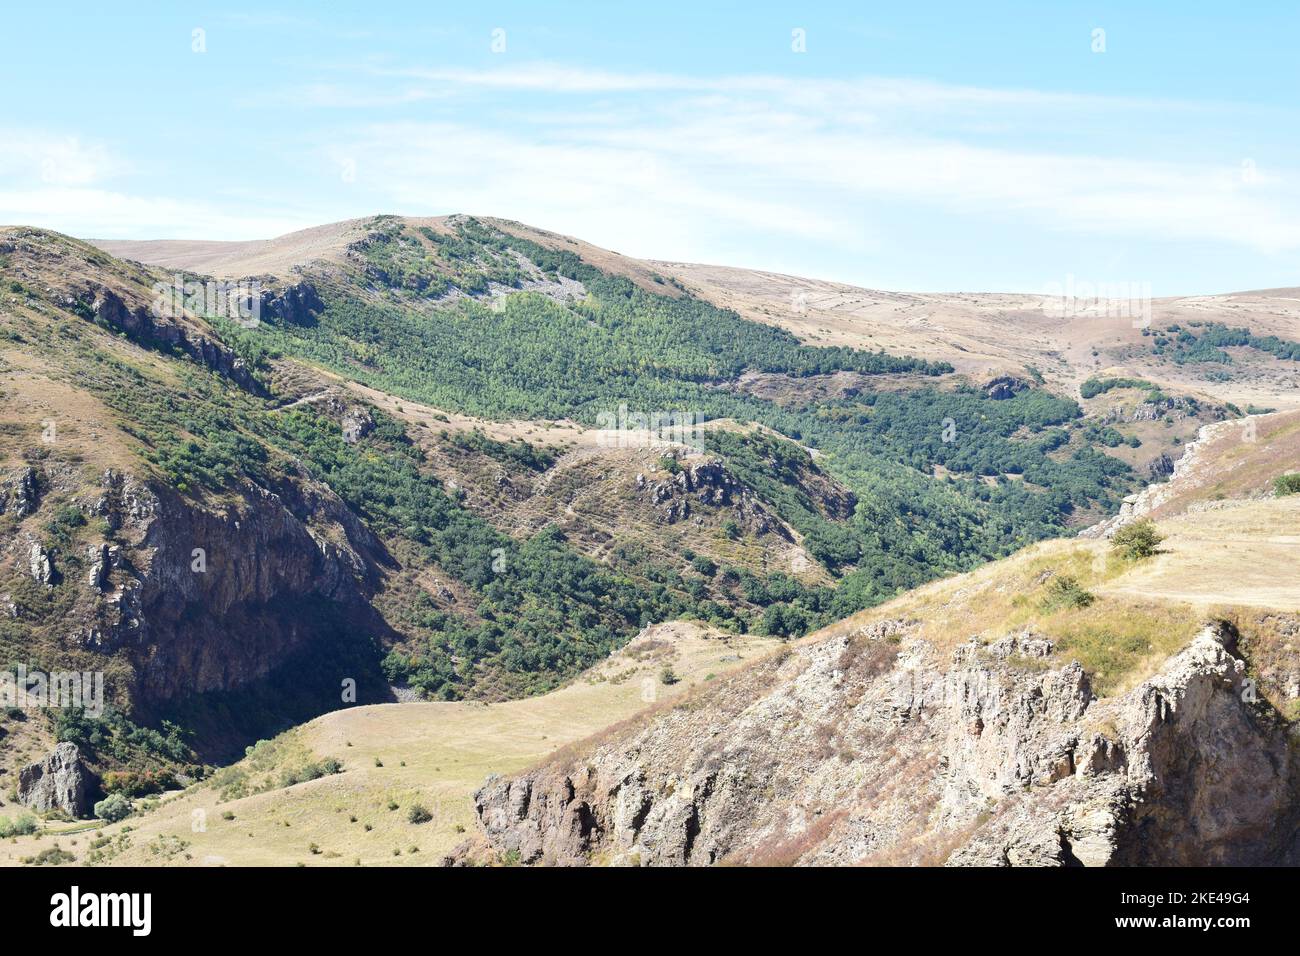 View of the rugged terrain in Ardahan province in the east of Turkey. Photo taken in September 2022. Stock Photo